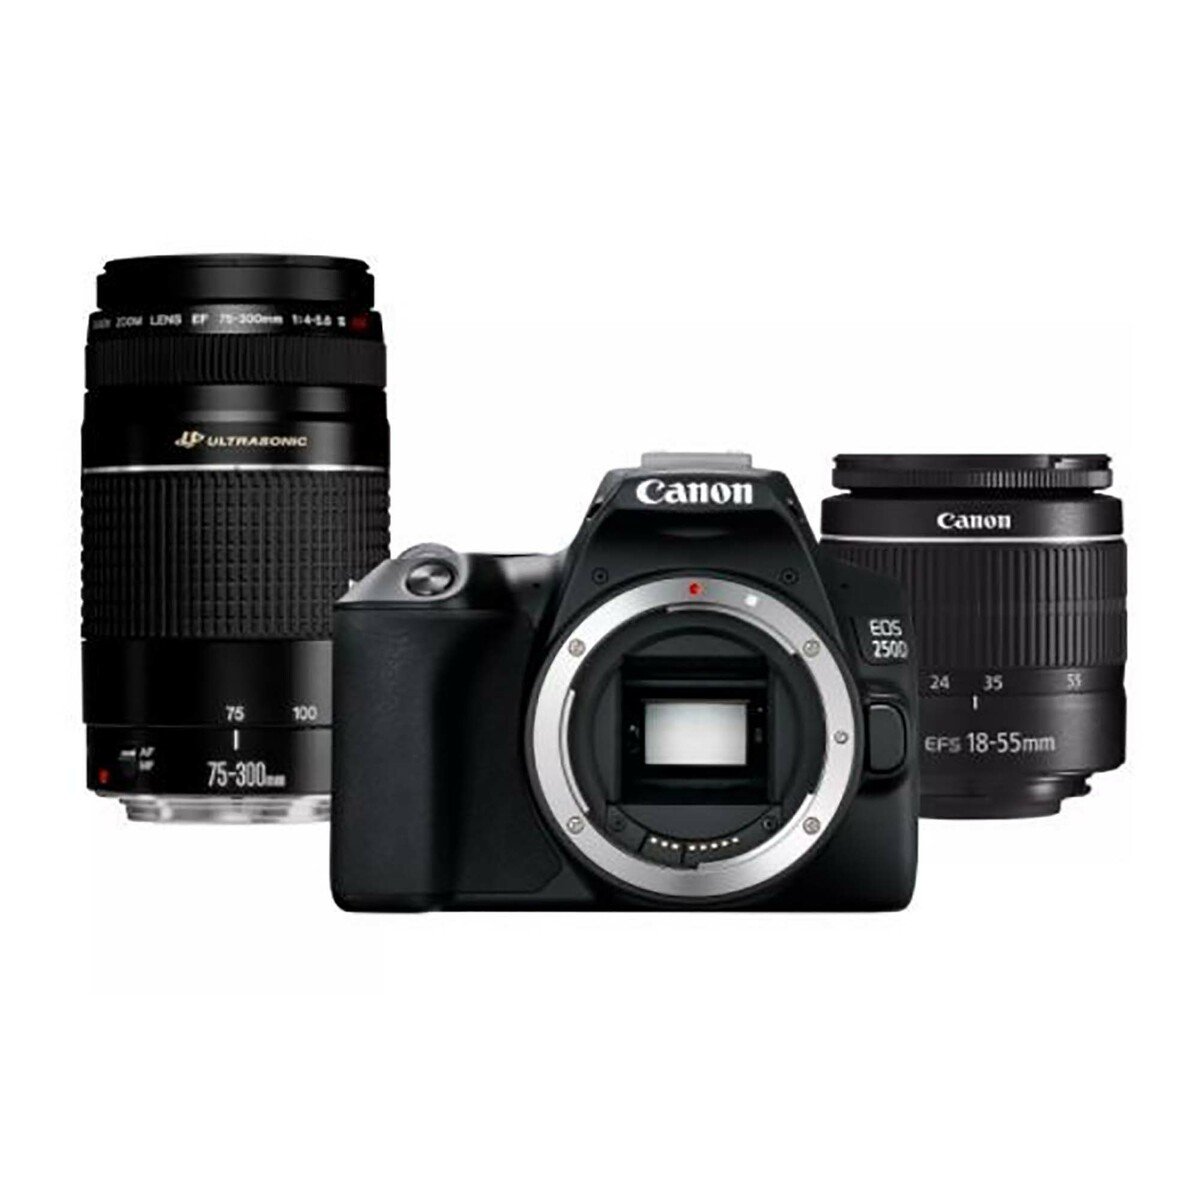 Canon DSLR Camera EOS 250D EF-S 18-55mm IS Lens Silver + 75-300mm DC ...